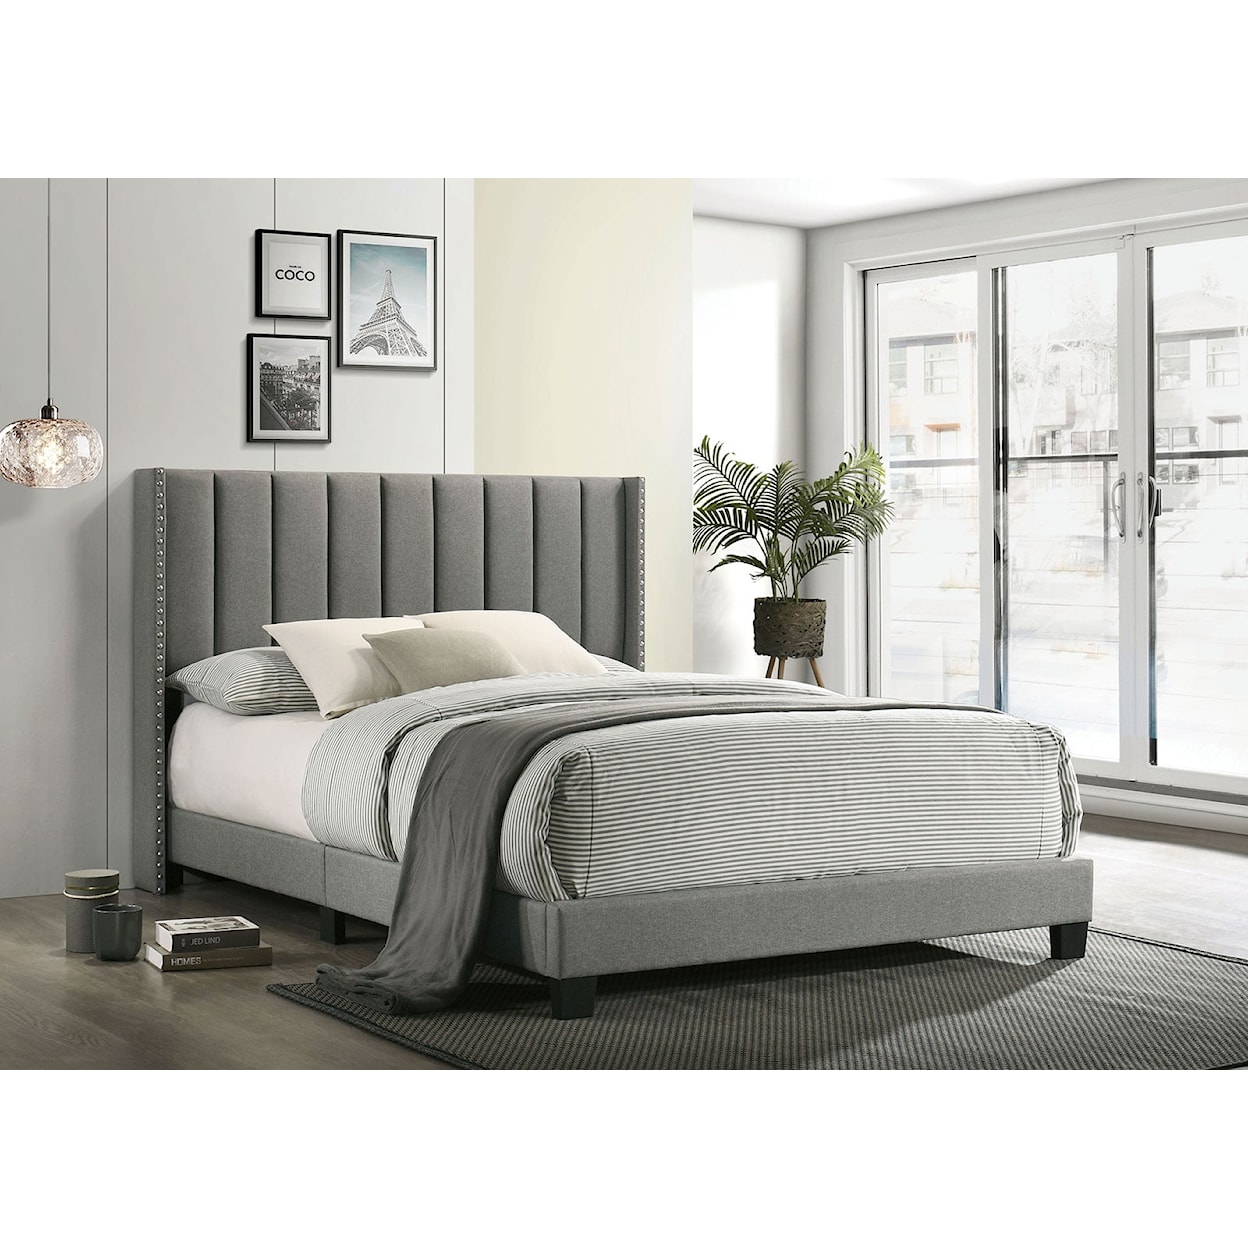 Furniture of America Kailey Cal. King Upholstered Bed